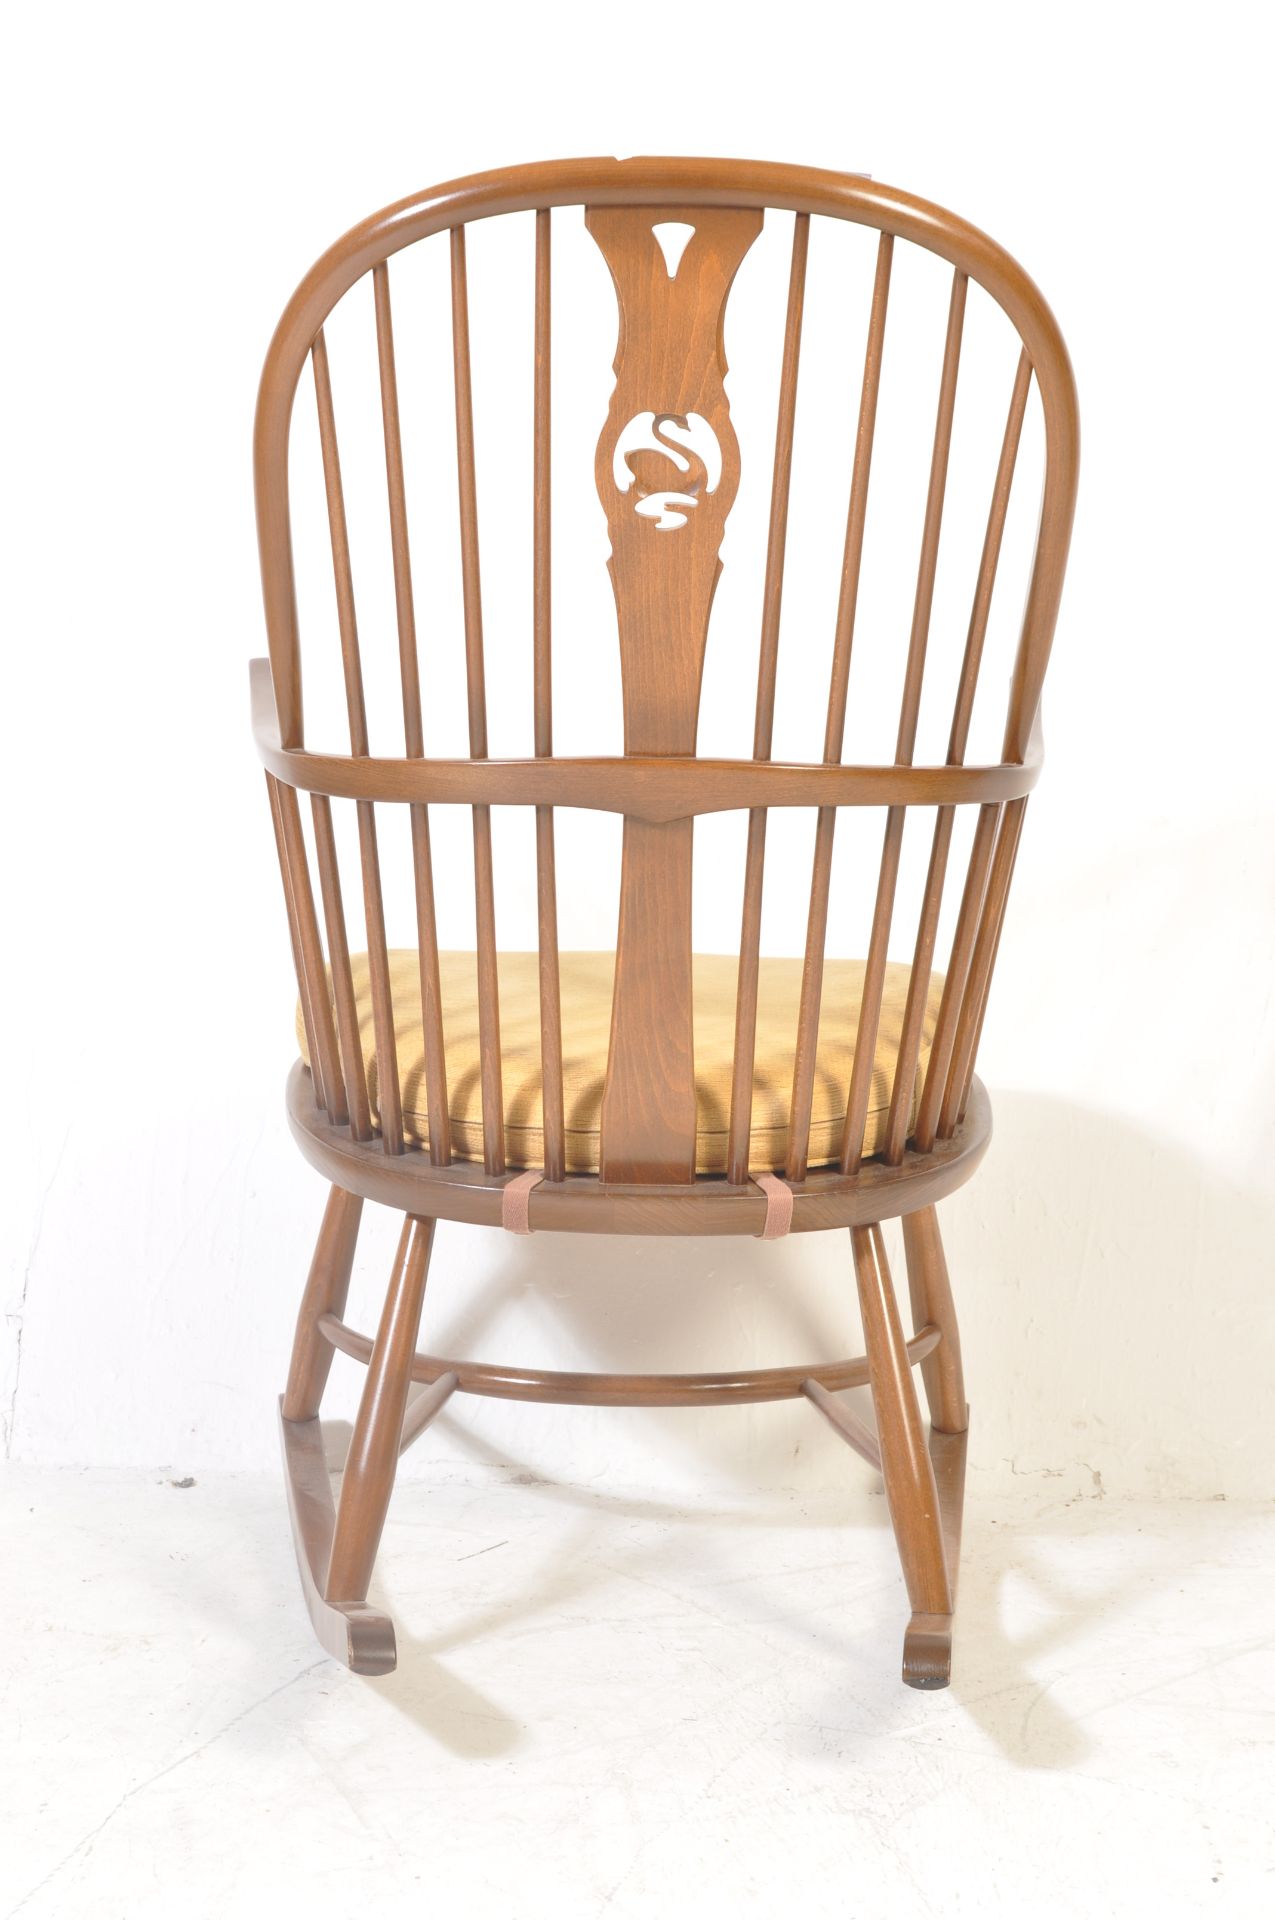 MID 20TH CENTURY ERCOL SWAN PATTERN ROCKING CHAIR - Image 5 of 5